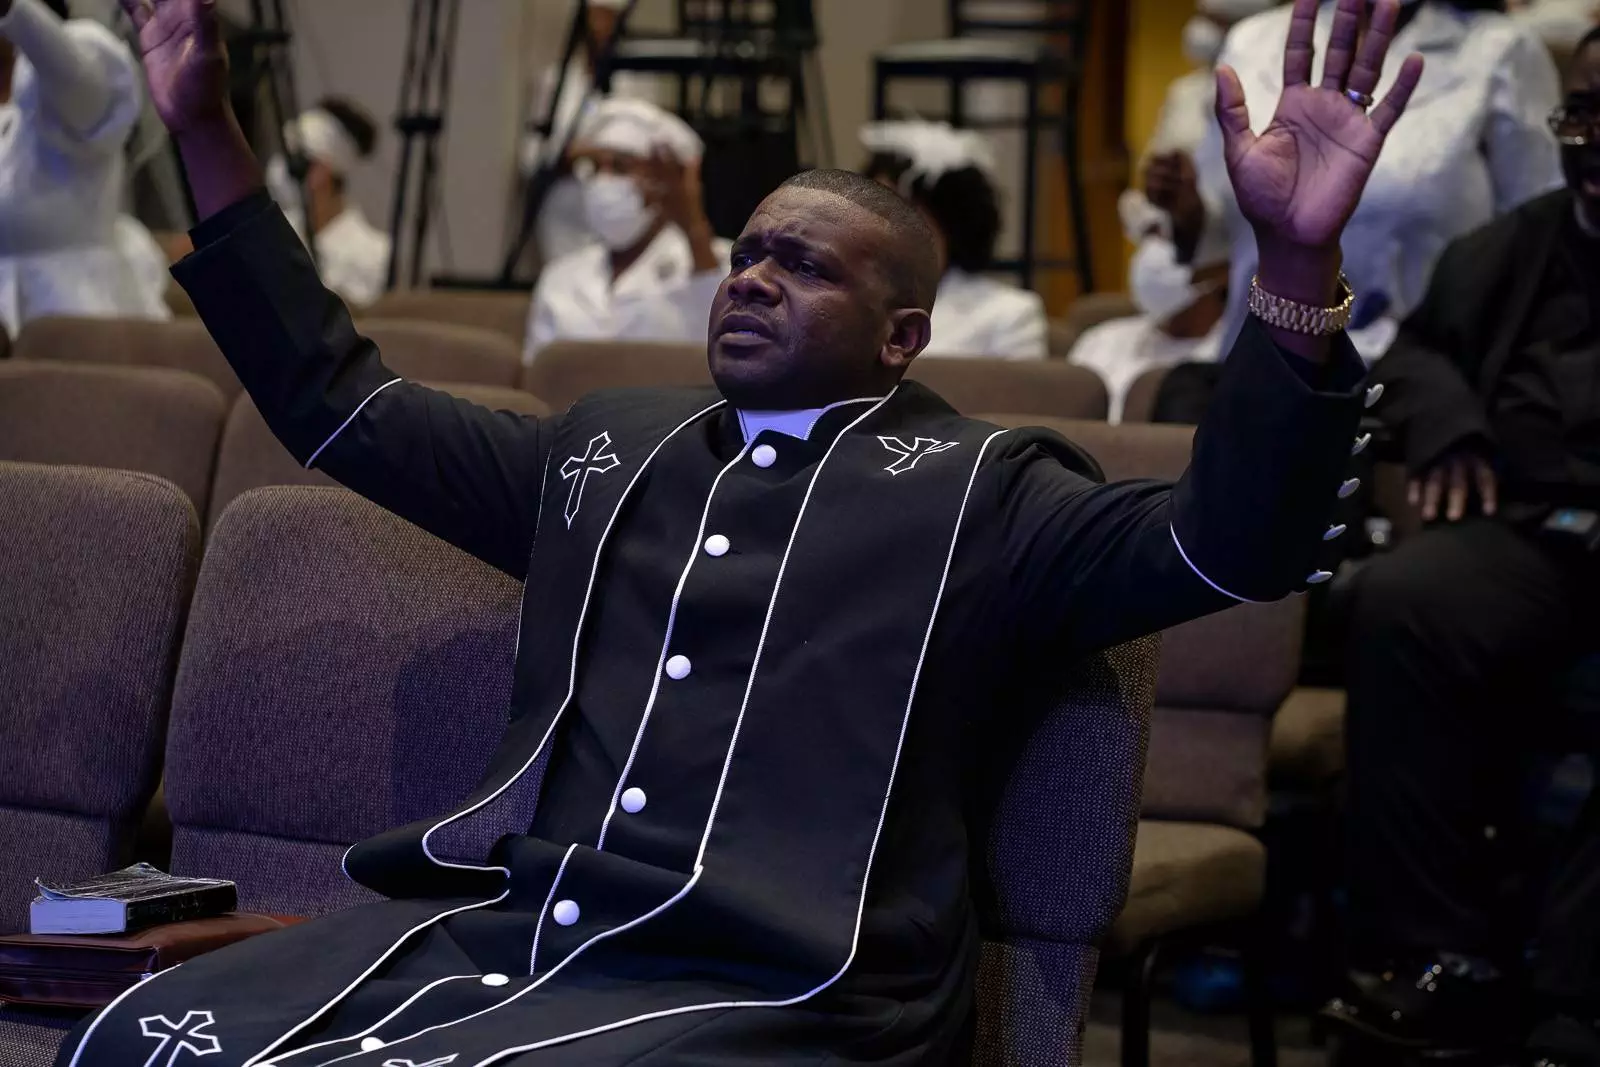 An apostolic man is sitting in a church with his hands raised.